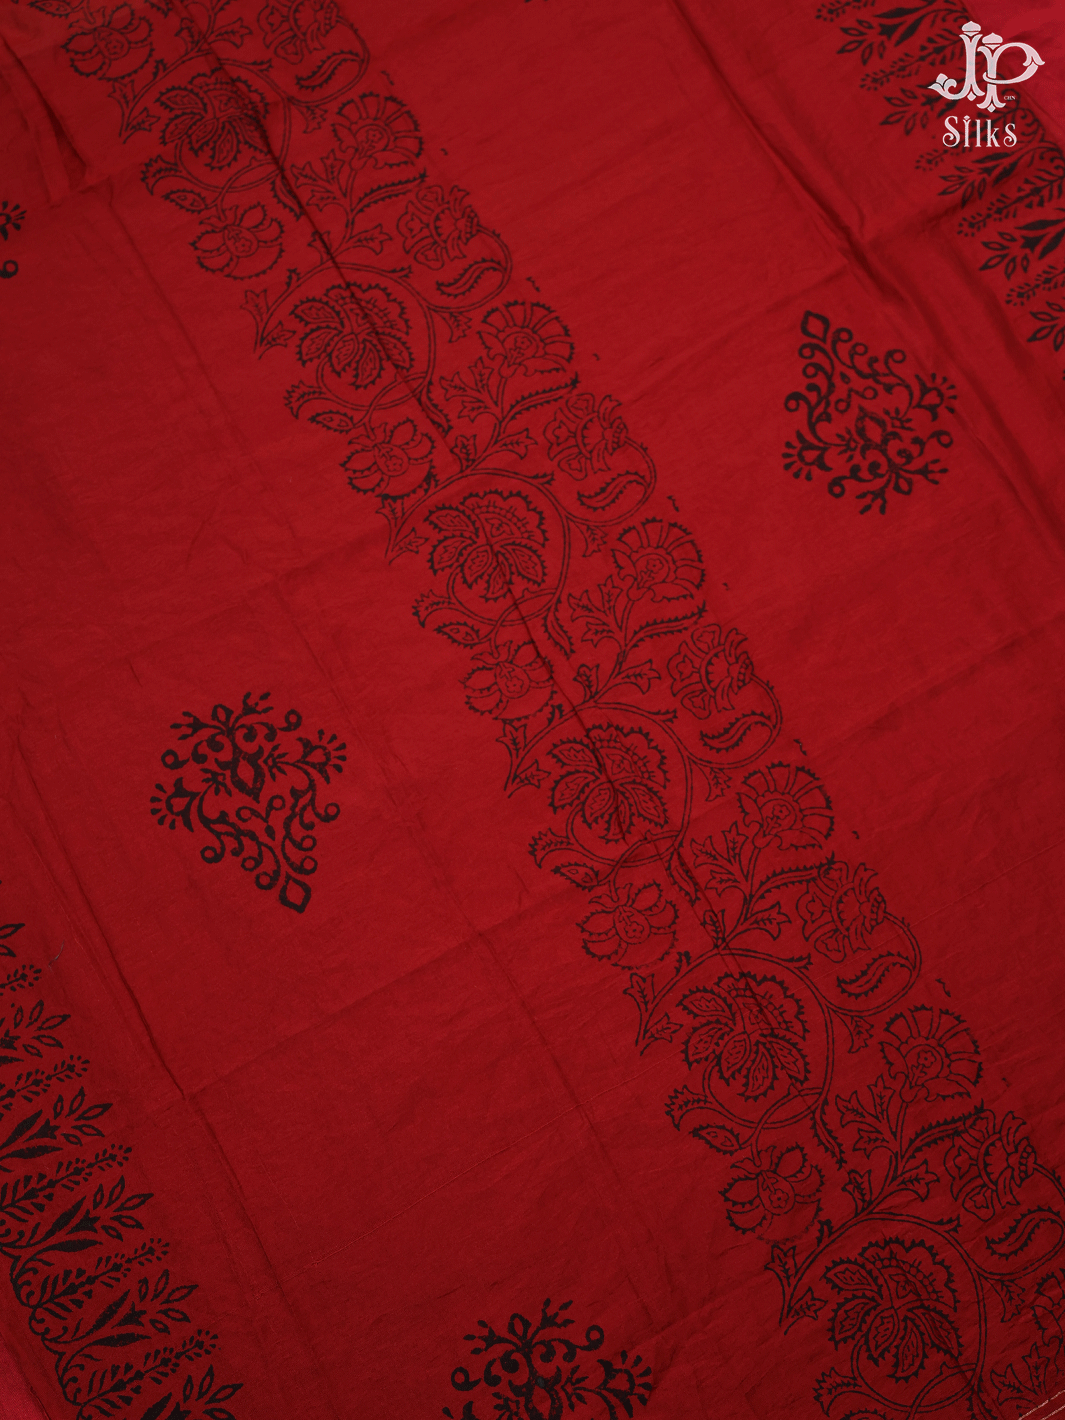 Red and Black Cotton Chudidhar Material - E6127 - View 5